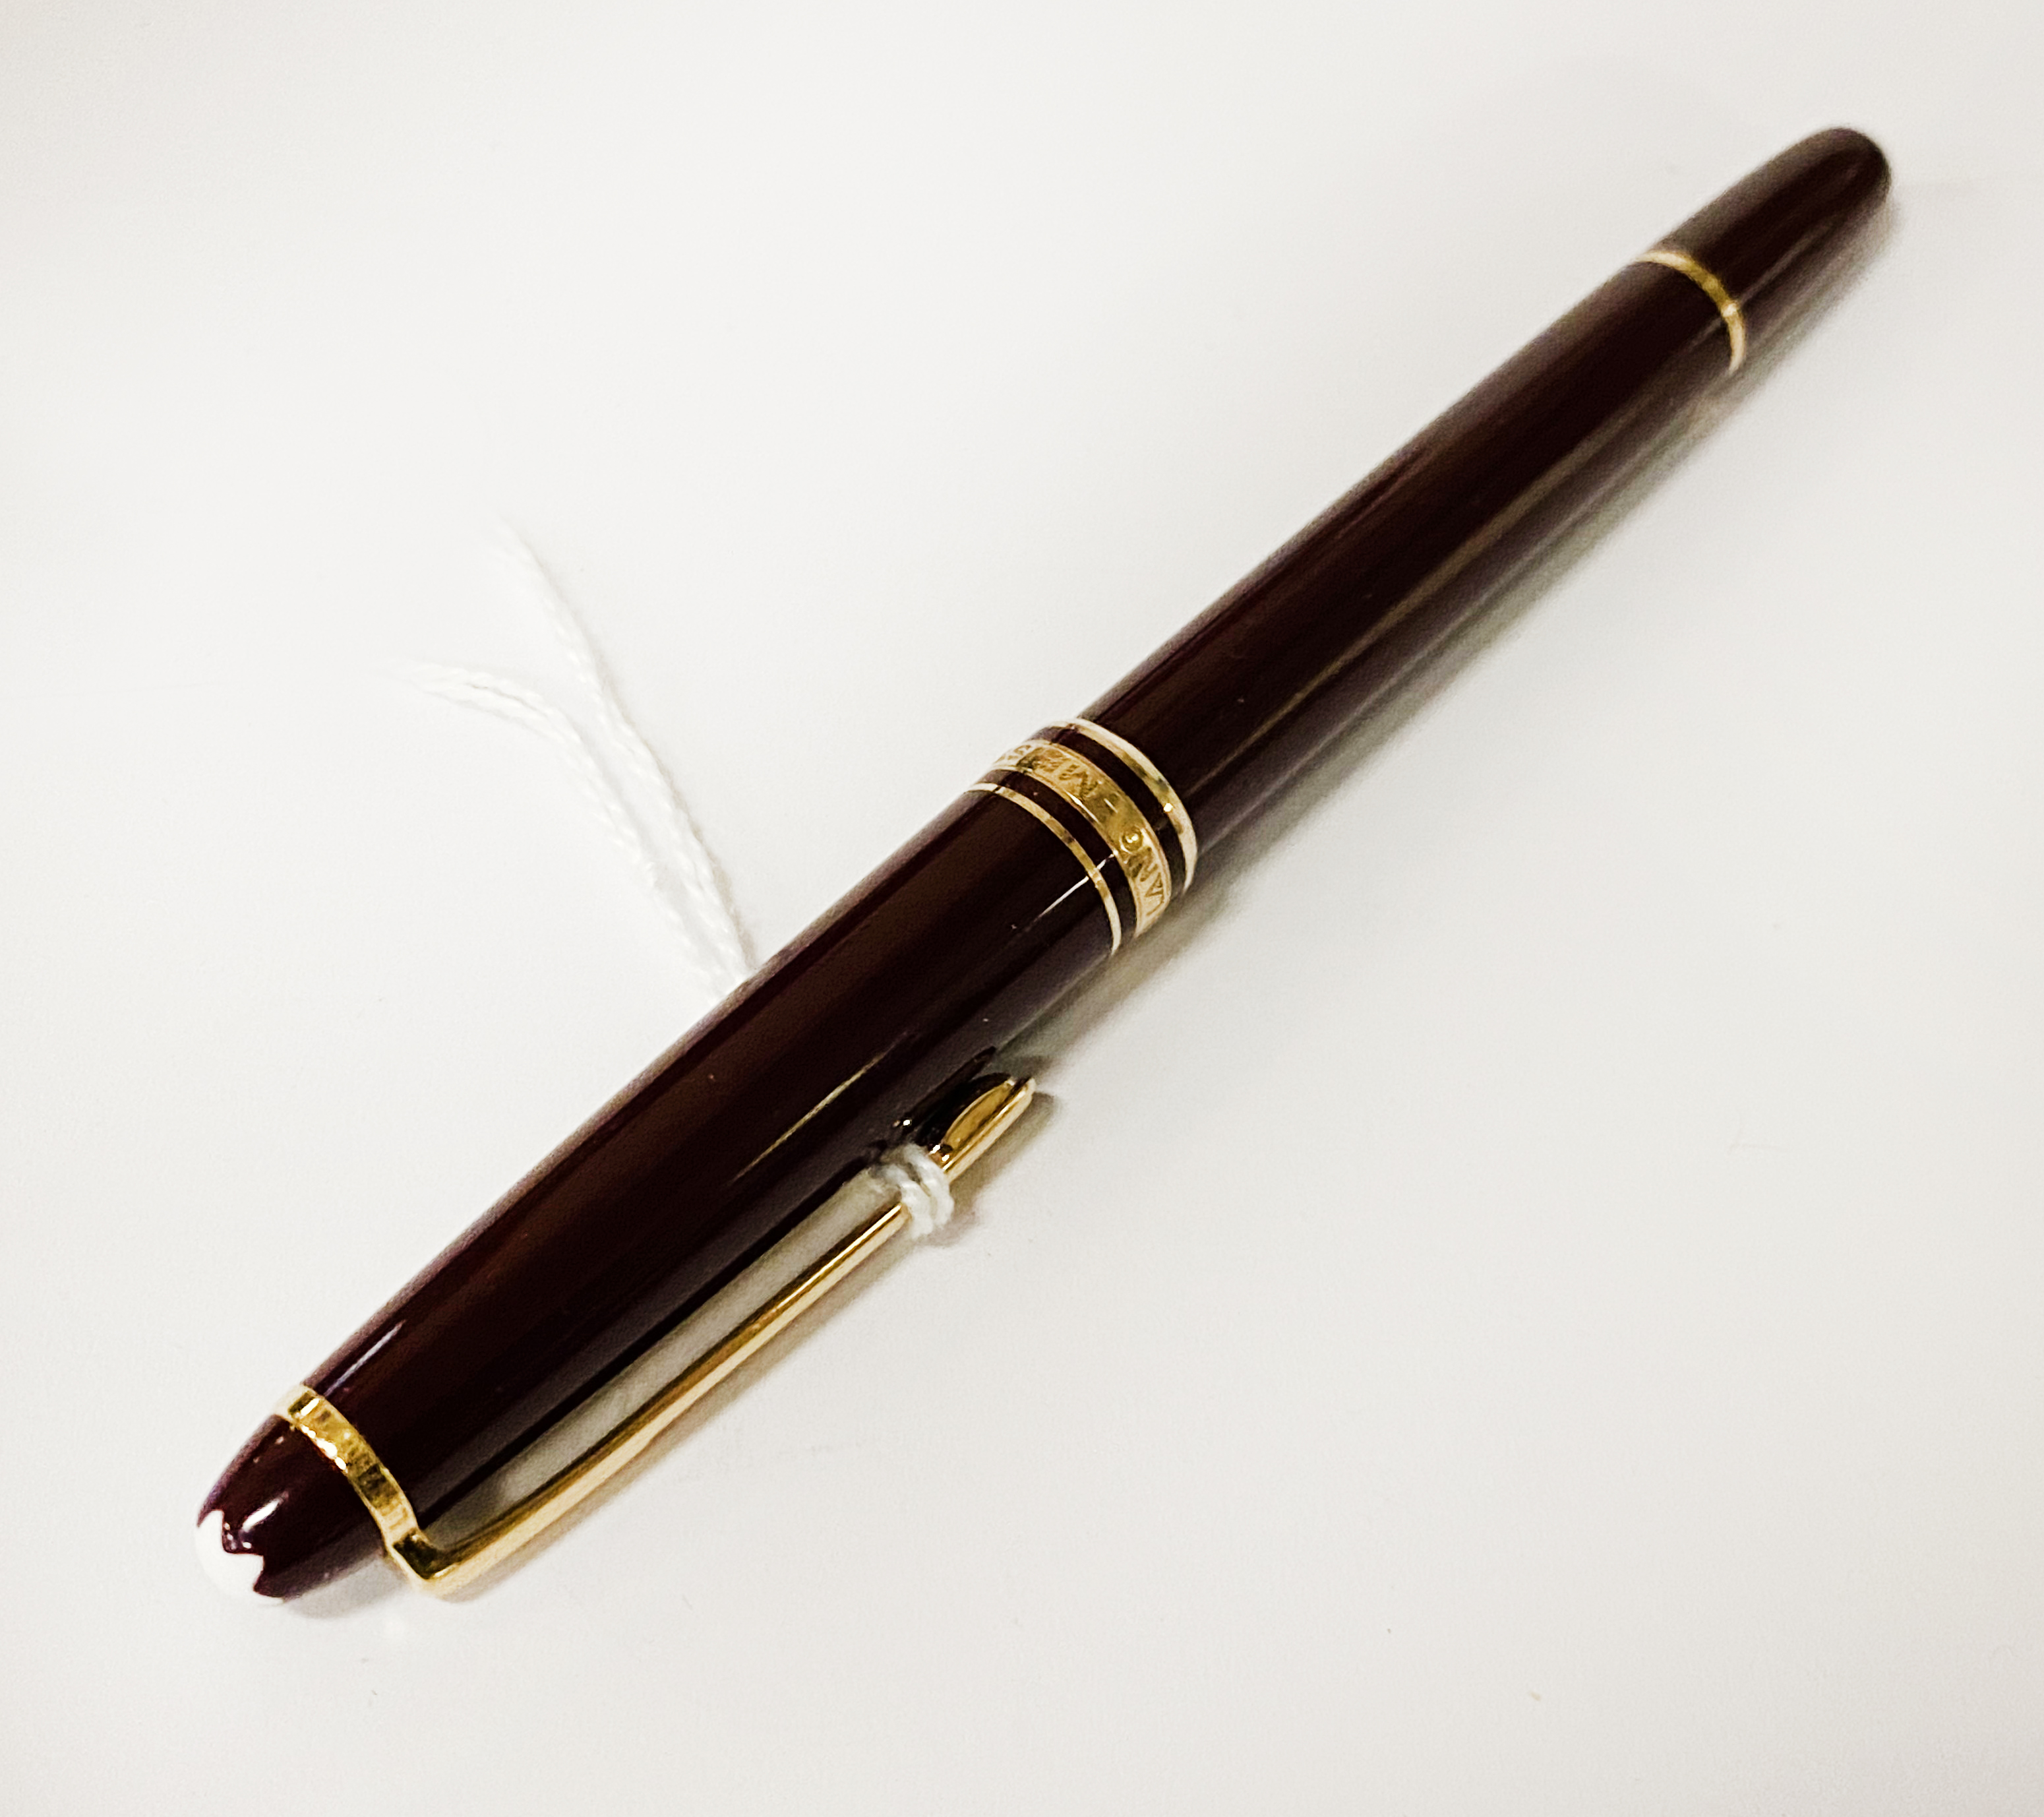 MONT BLANC MEISTERSTUCK BURGANDY FOUNTAIN PEN - WRITES WELL IN GOOD CONDITION